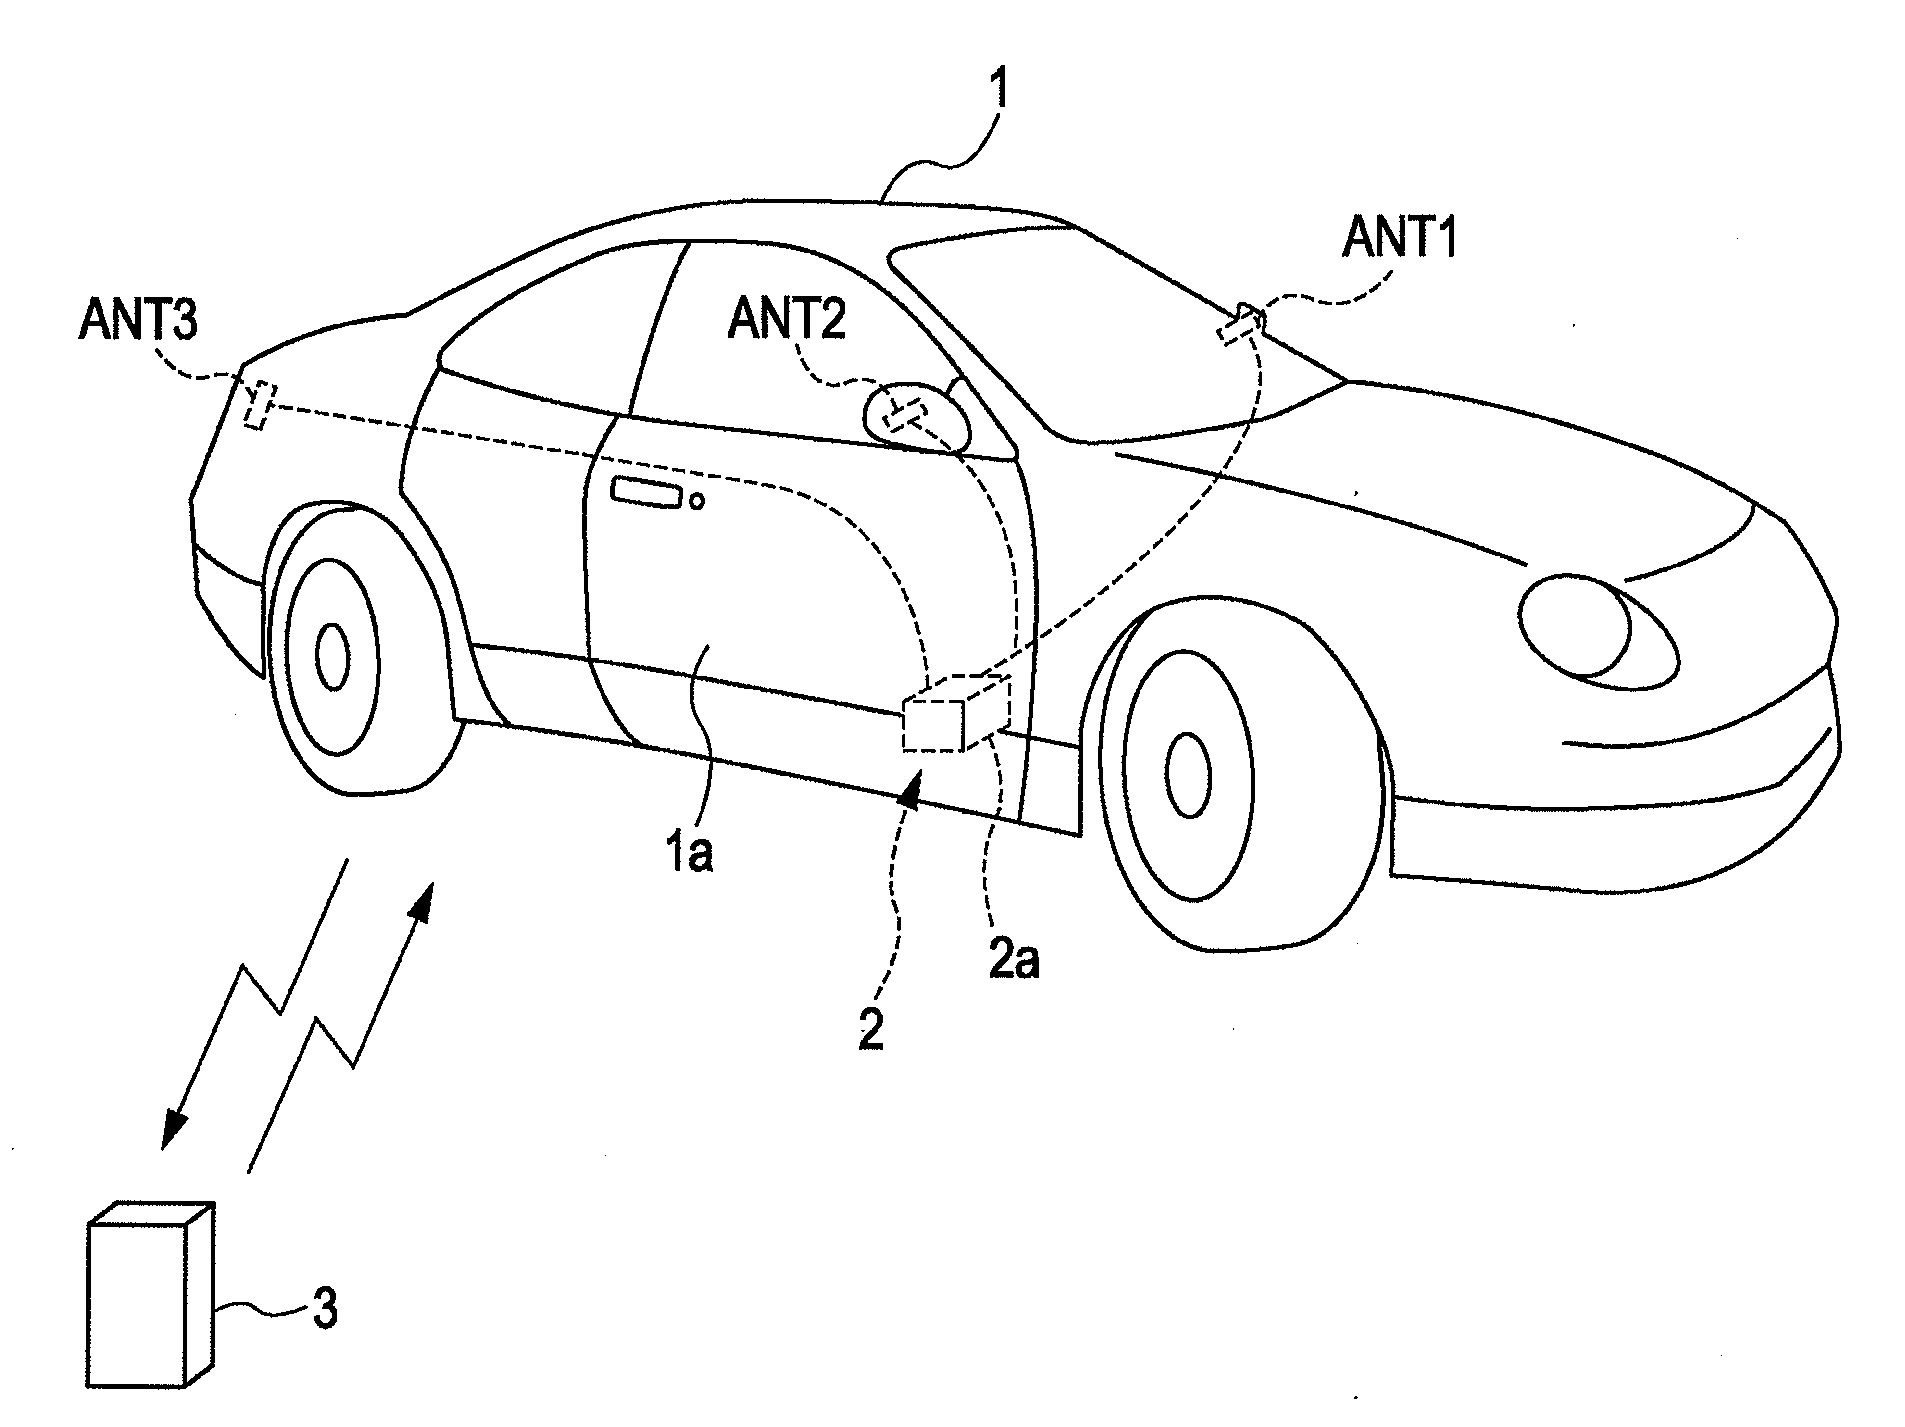 Mobile device for vehicle